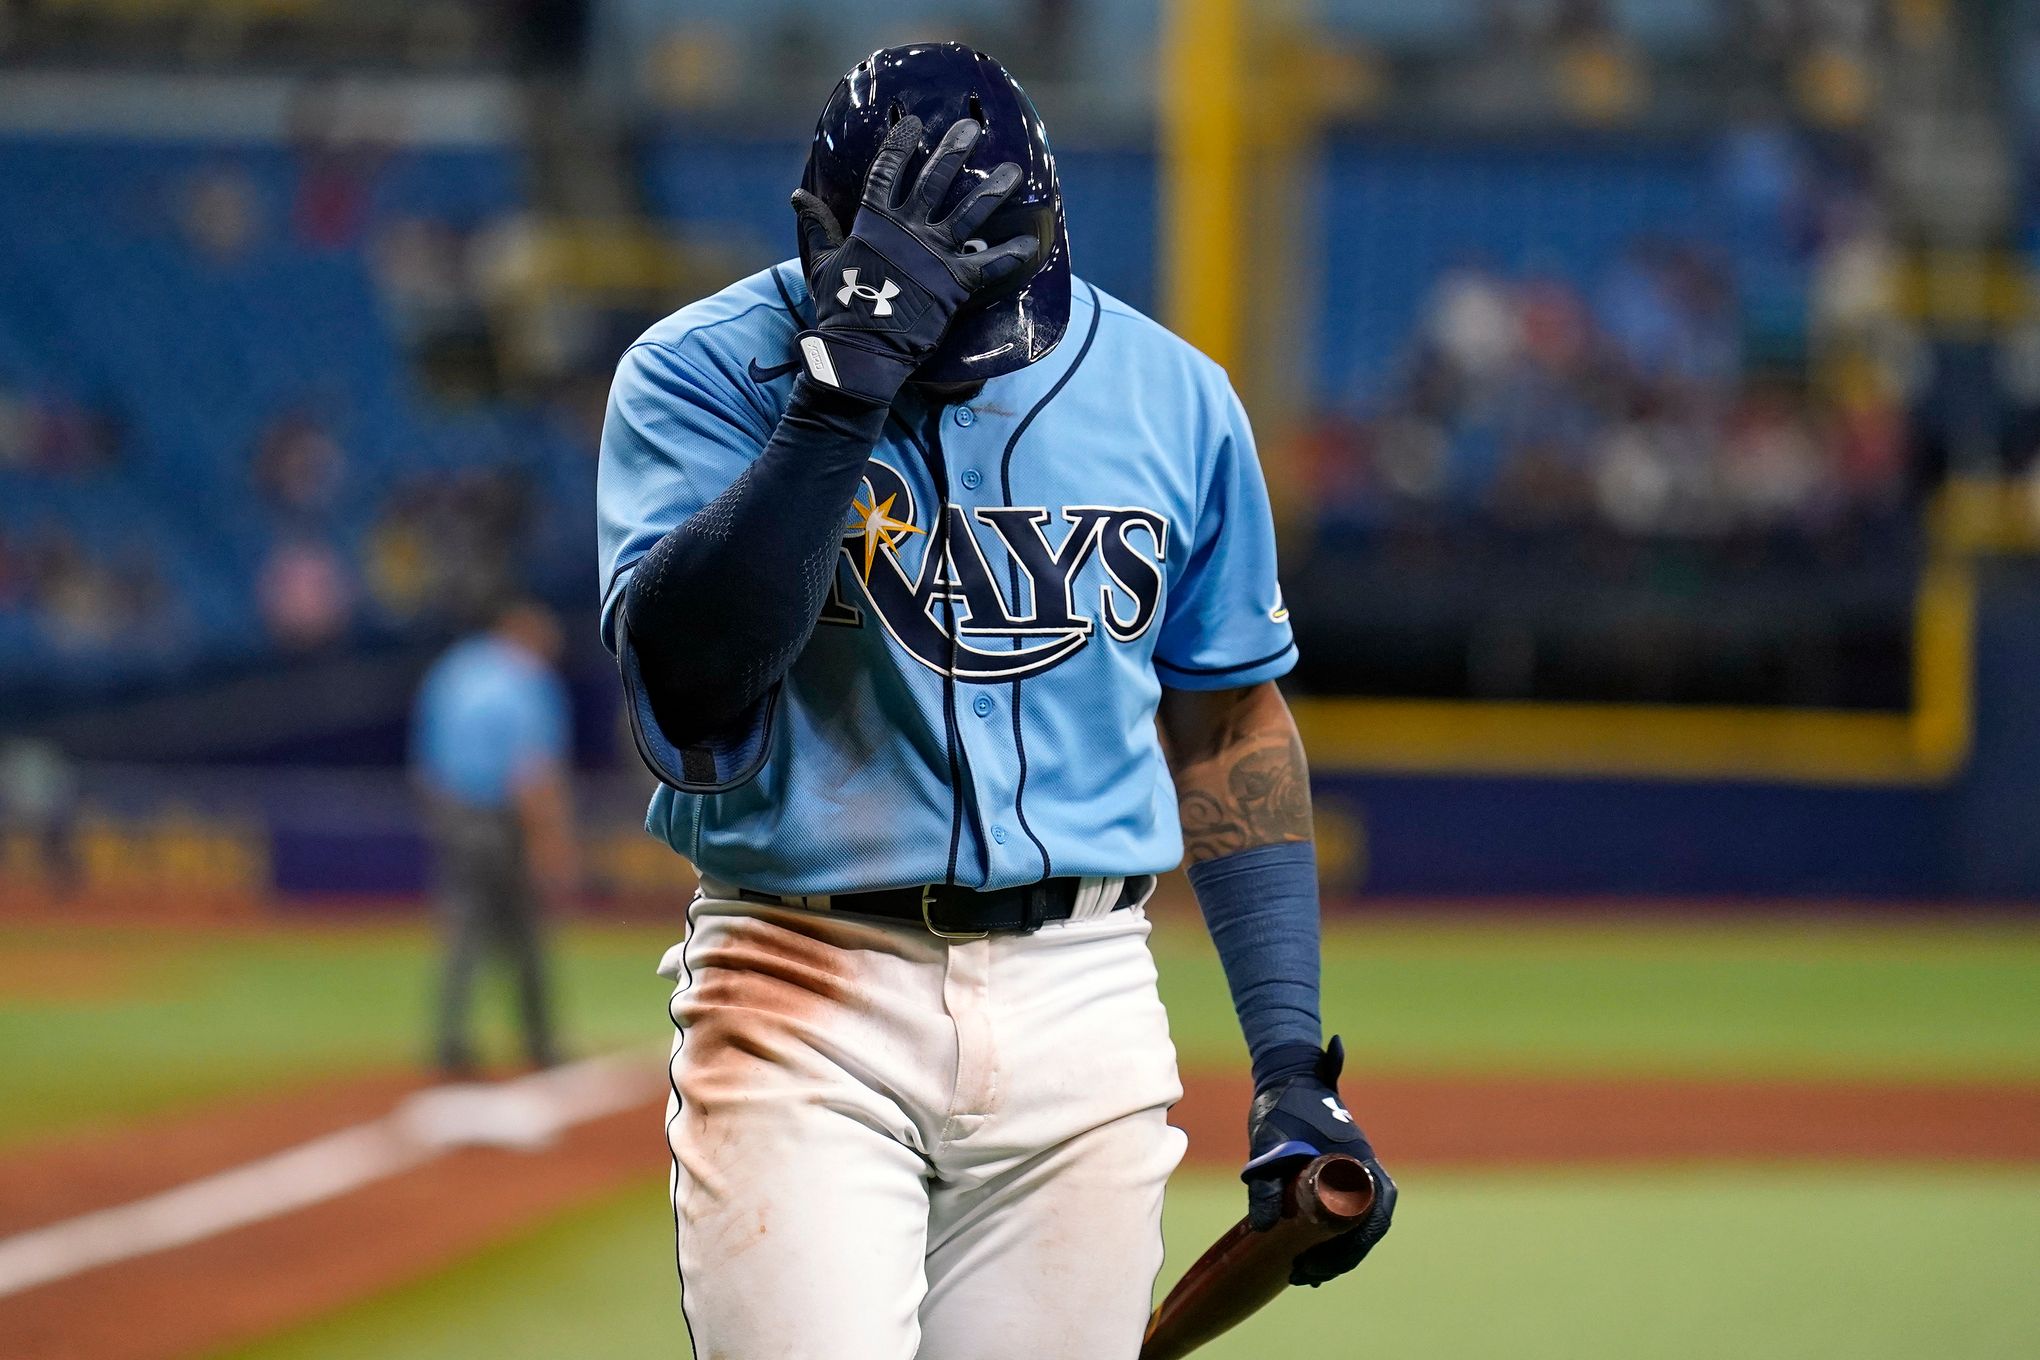 Tampa Bay Rays' Brandon Lowe throws his helmet after striking out